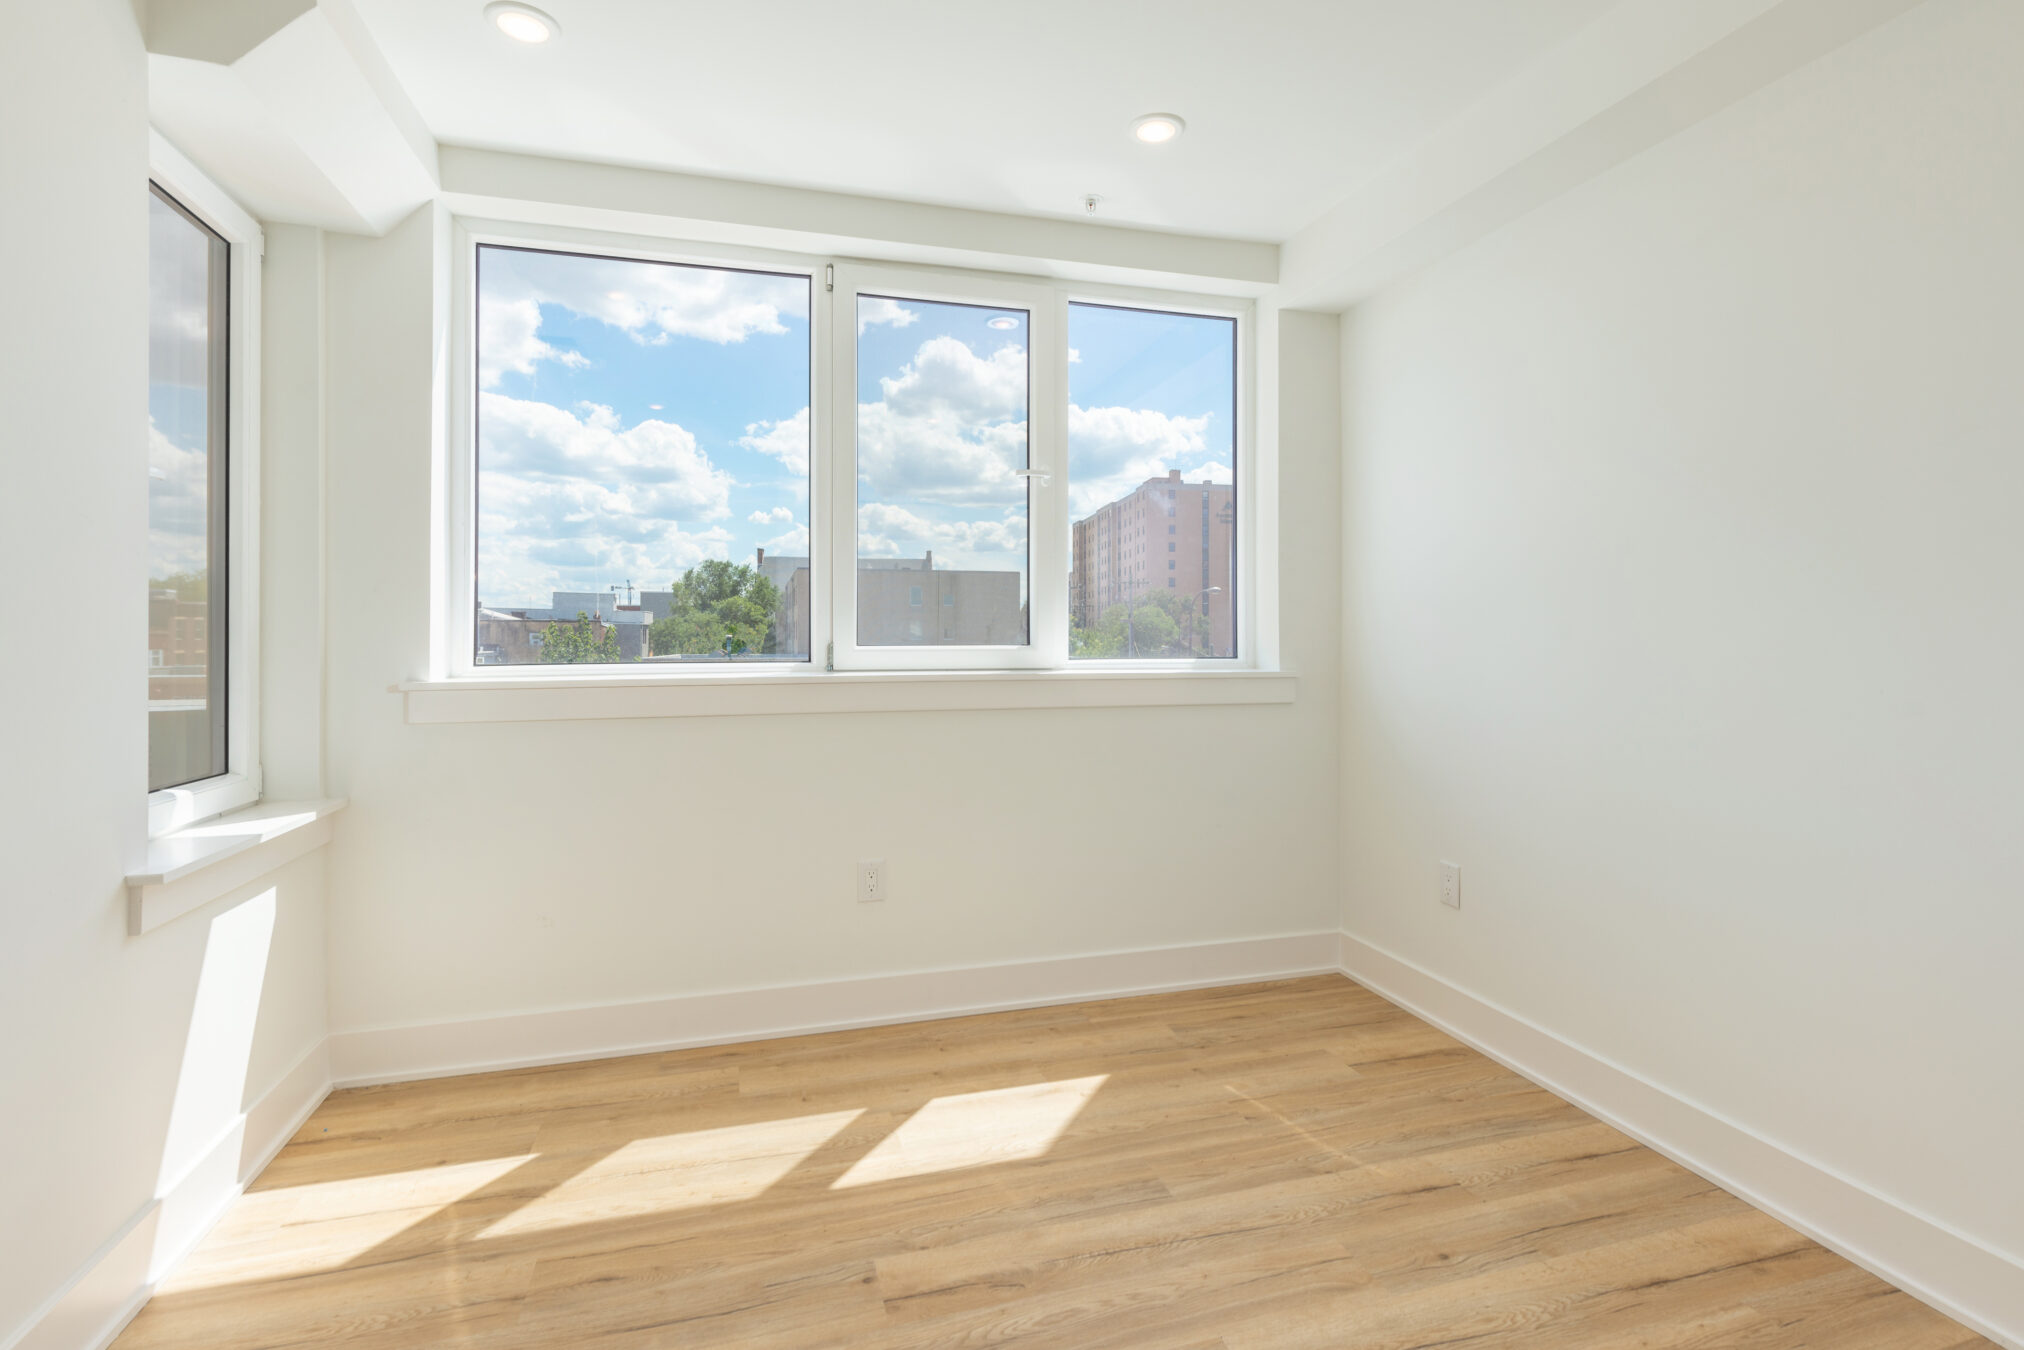 Property Photo For 629 W Girard Ave, Unit 402